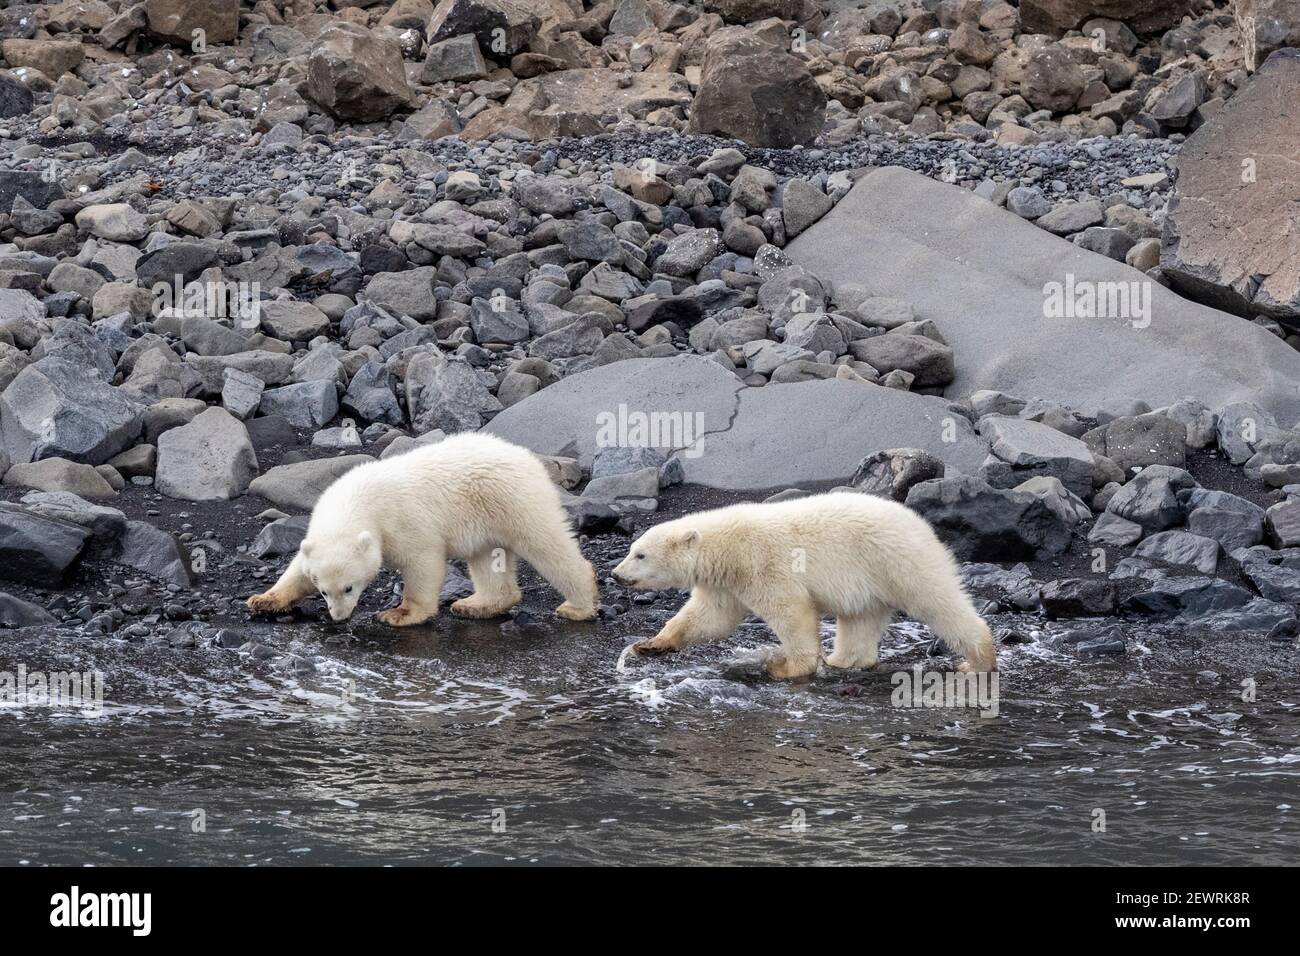 Polar bear cubs of the year (Ursus maritimus), foraging for food with mother nearby, Cape Brewster, Greenland, Polar Regions Stock Photo